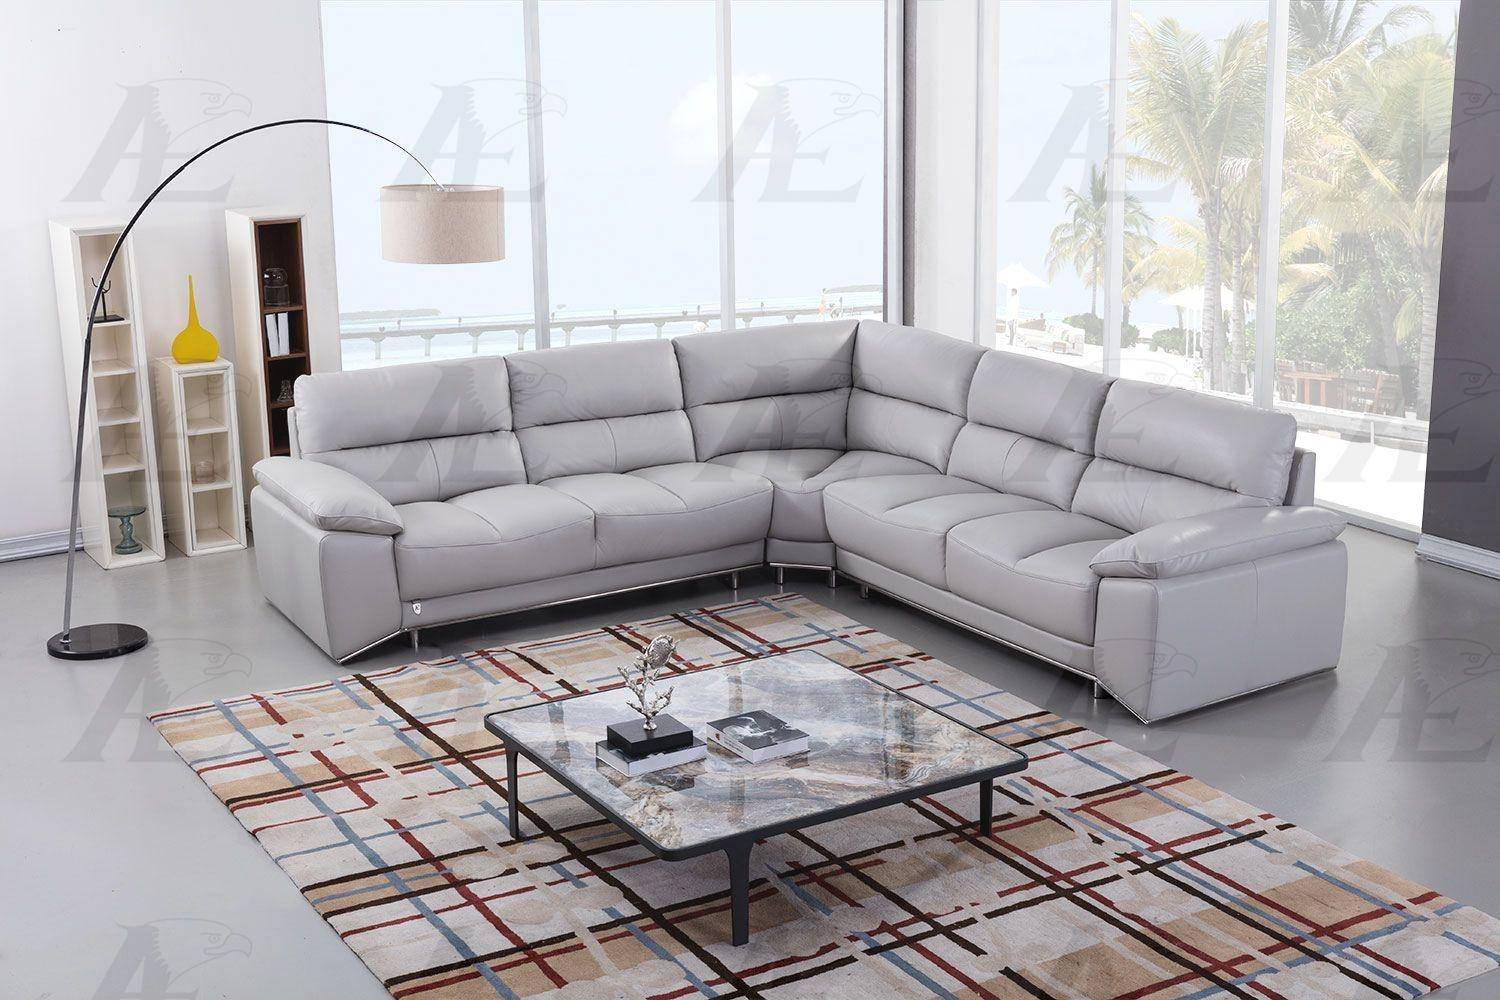 Ek L8000m Lg Sectional Sofa, Gray Leather Sectional Couch